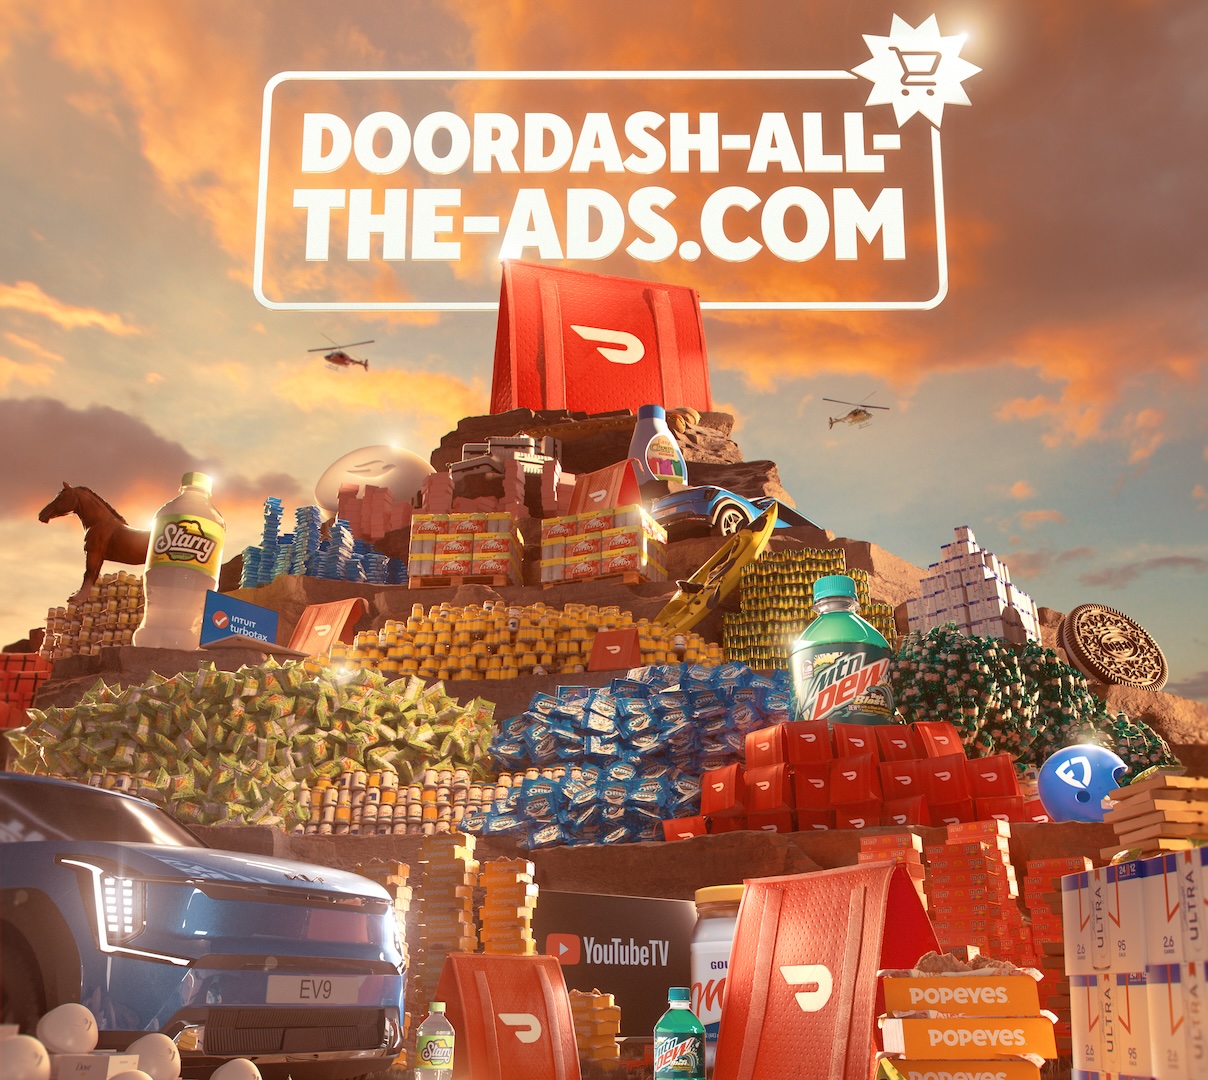 DoorDash to Deliver All the Big Game Ads to One Lucky Viewer